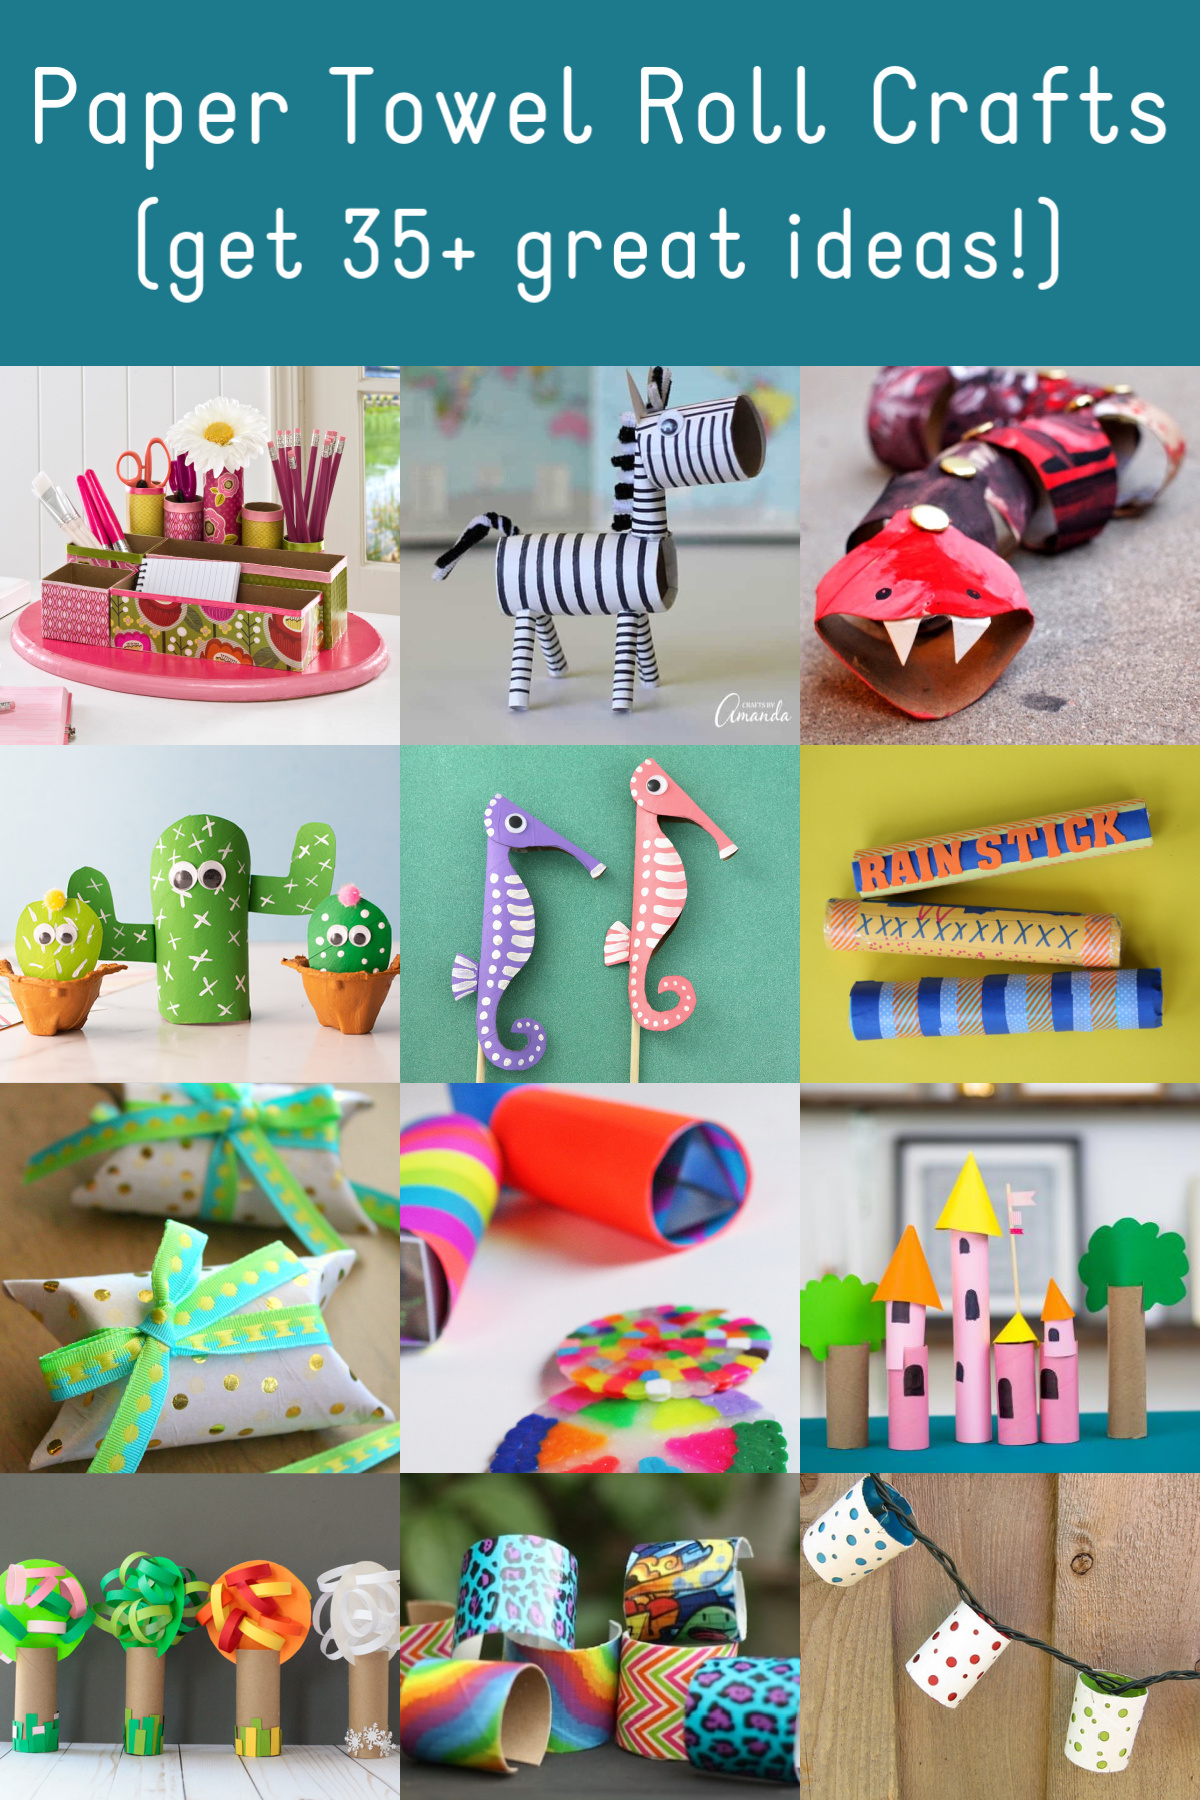 50+ Fun Toilet Paper Roll Crafts for Kids' Creative Play - Mod Podge Rocks